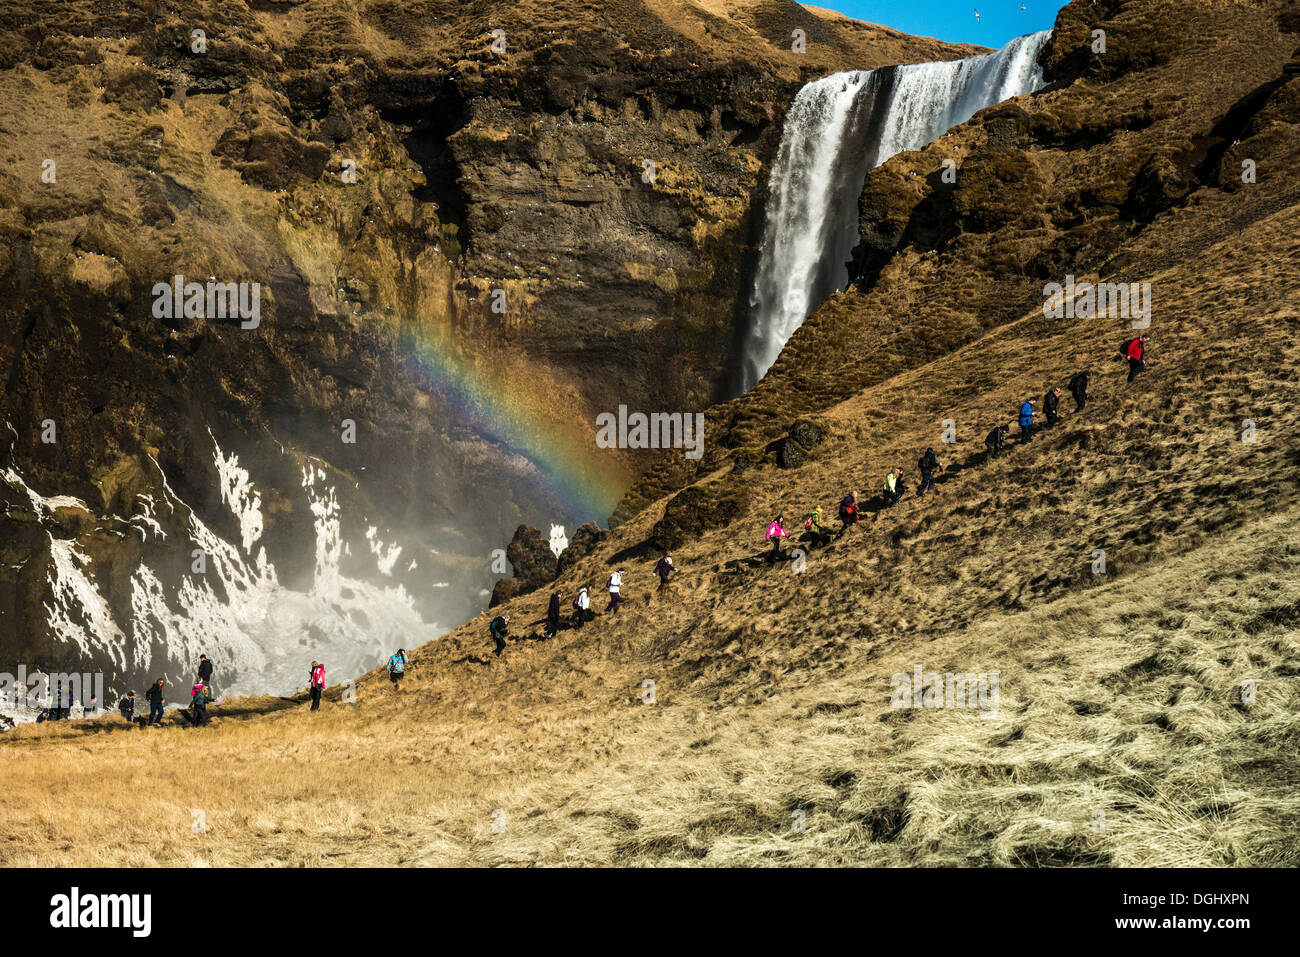 Tourist group hiking in front of the Skógafoss waterfall, Skógar, Rangarþing eystra, Southern Region, Iceland Stock Photo